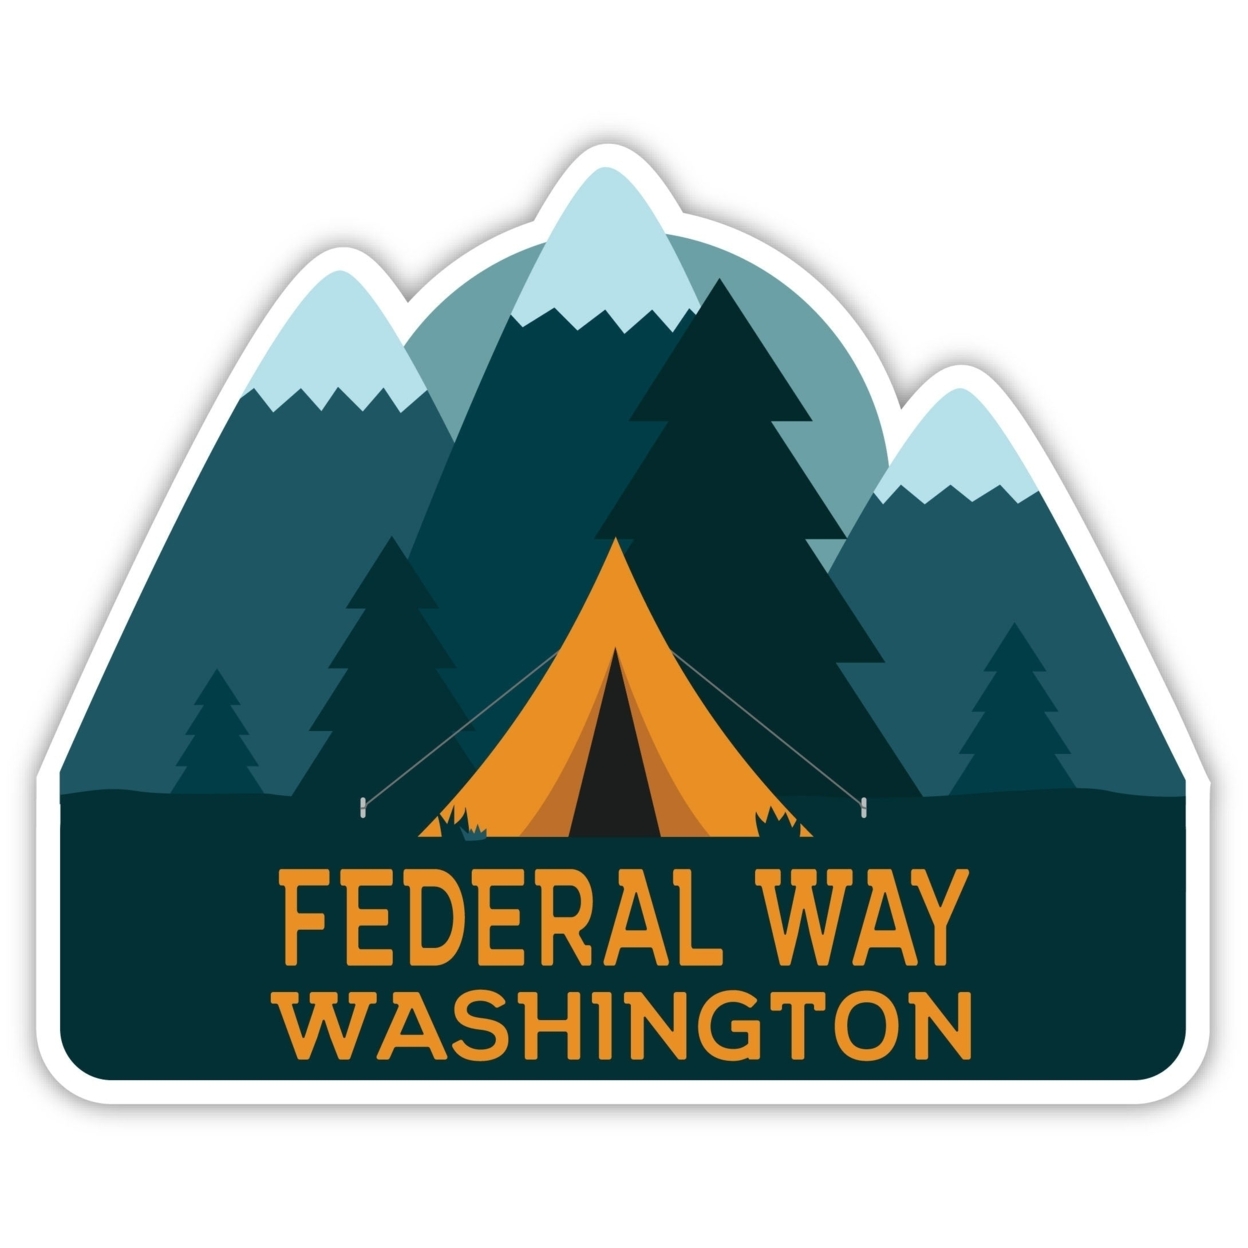 Federal Way Washington Souvenir Decorative Stickers (Choose Theme And Size) - 4-Pack, 8-Inch, Tent